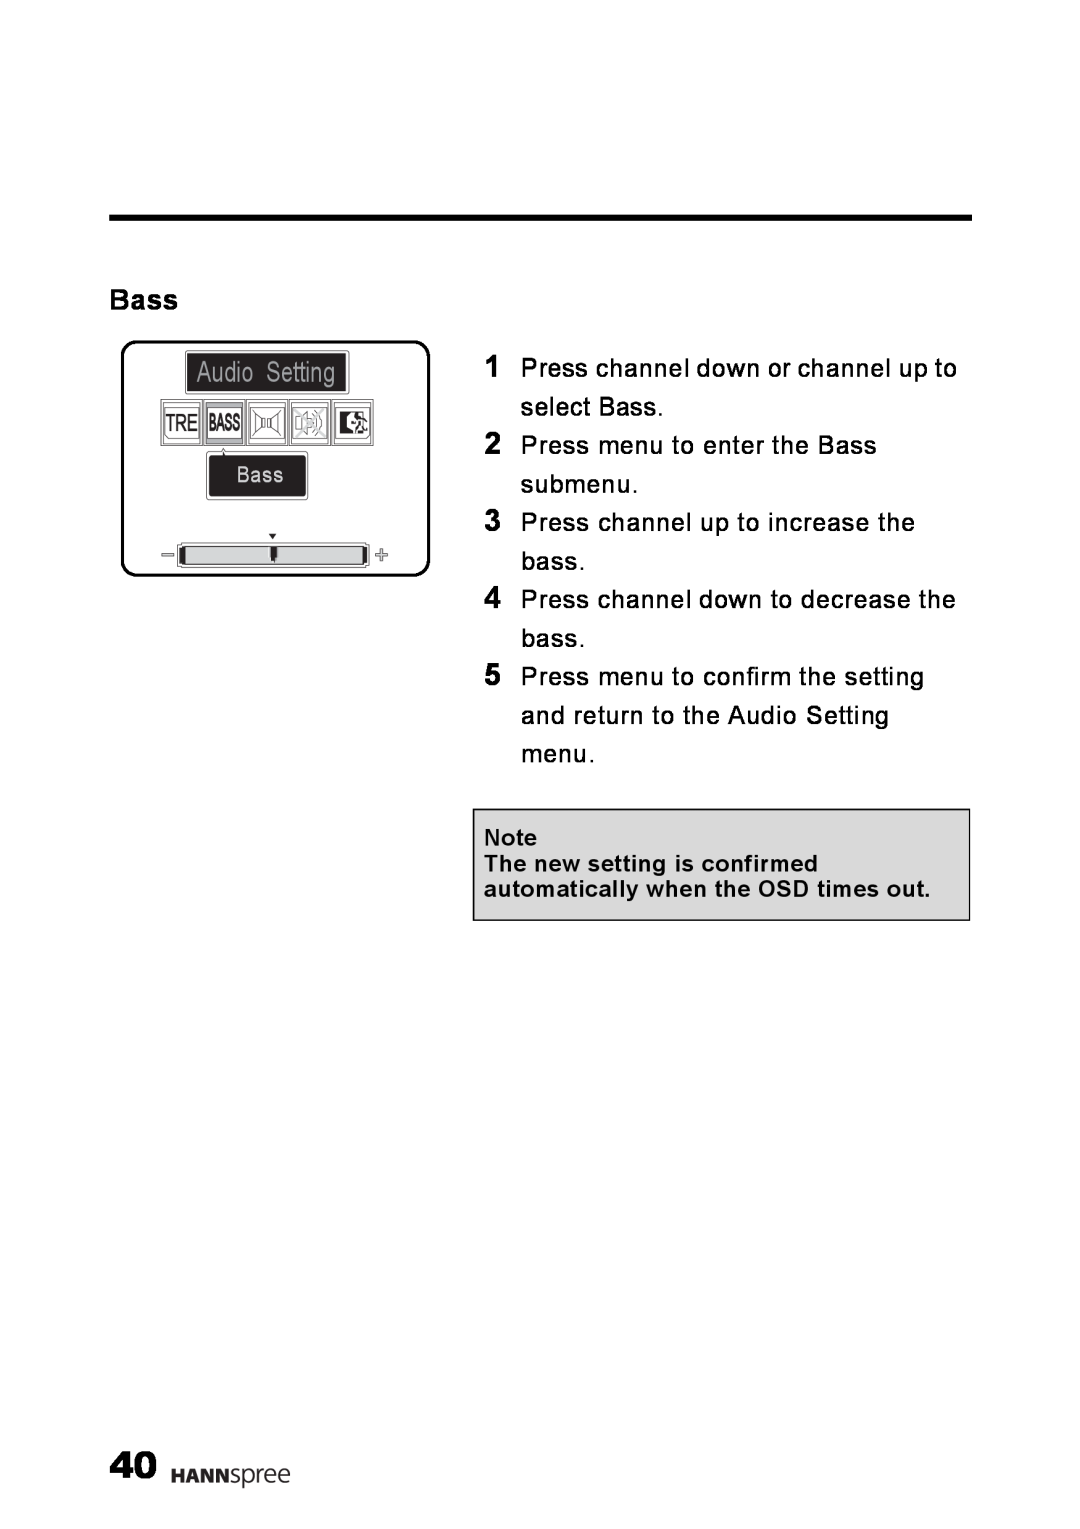 HANNspree LT09-10U1-000 user manual Audio Setting, Press channel down or channel up to select Bass, Tre Bass 